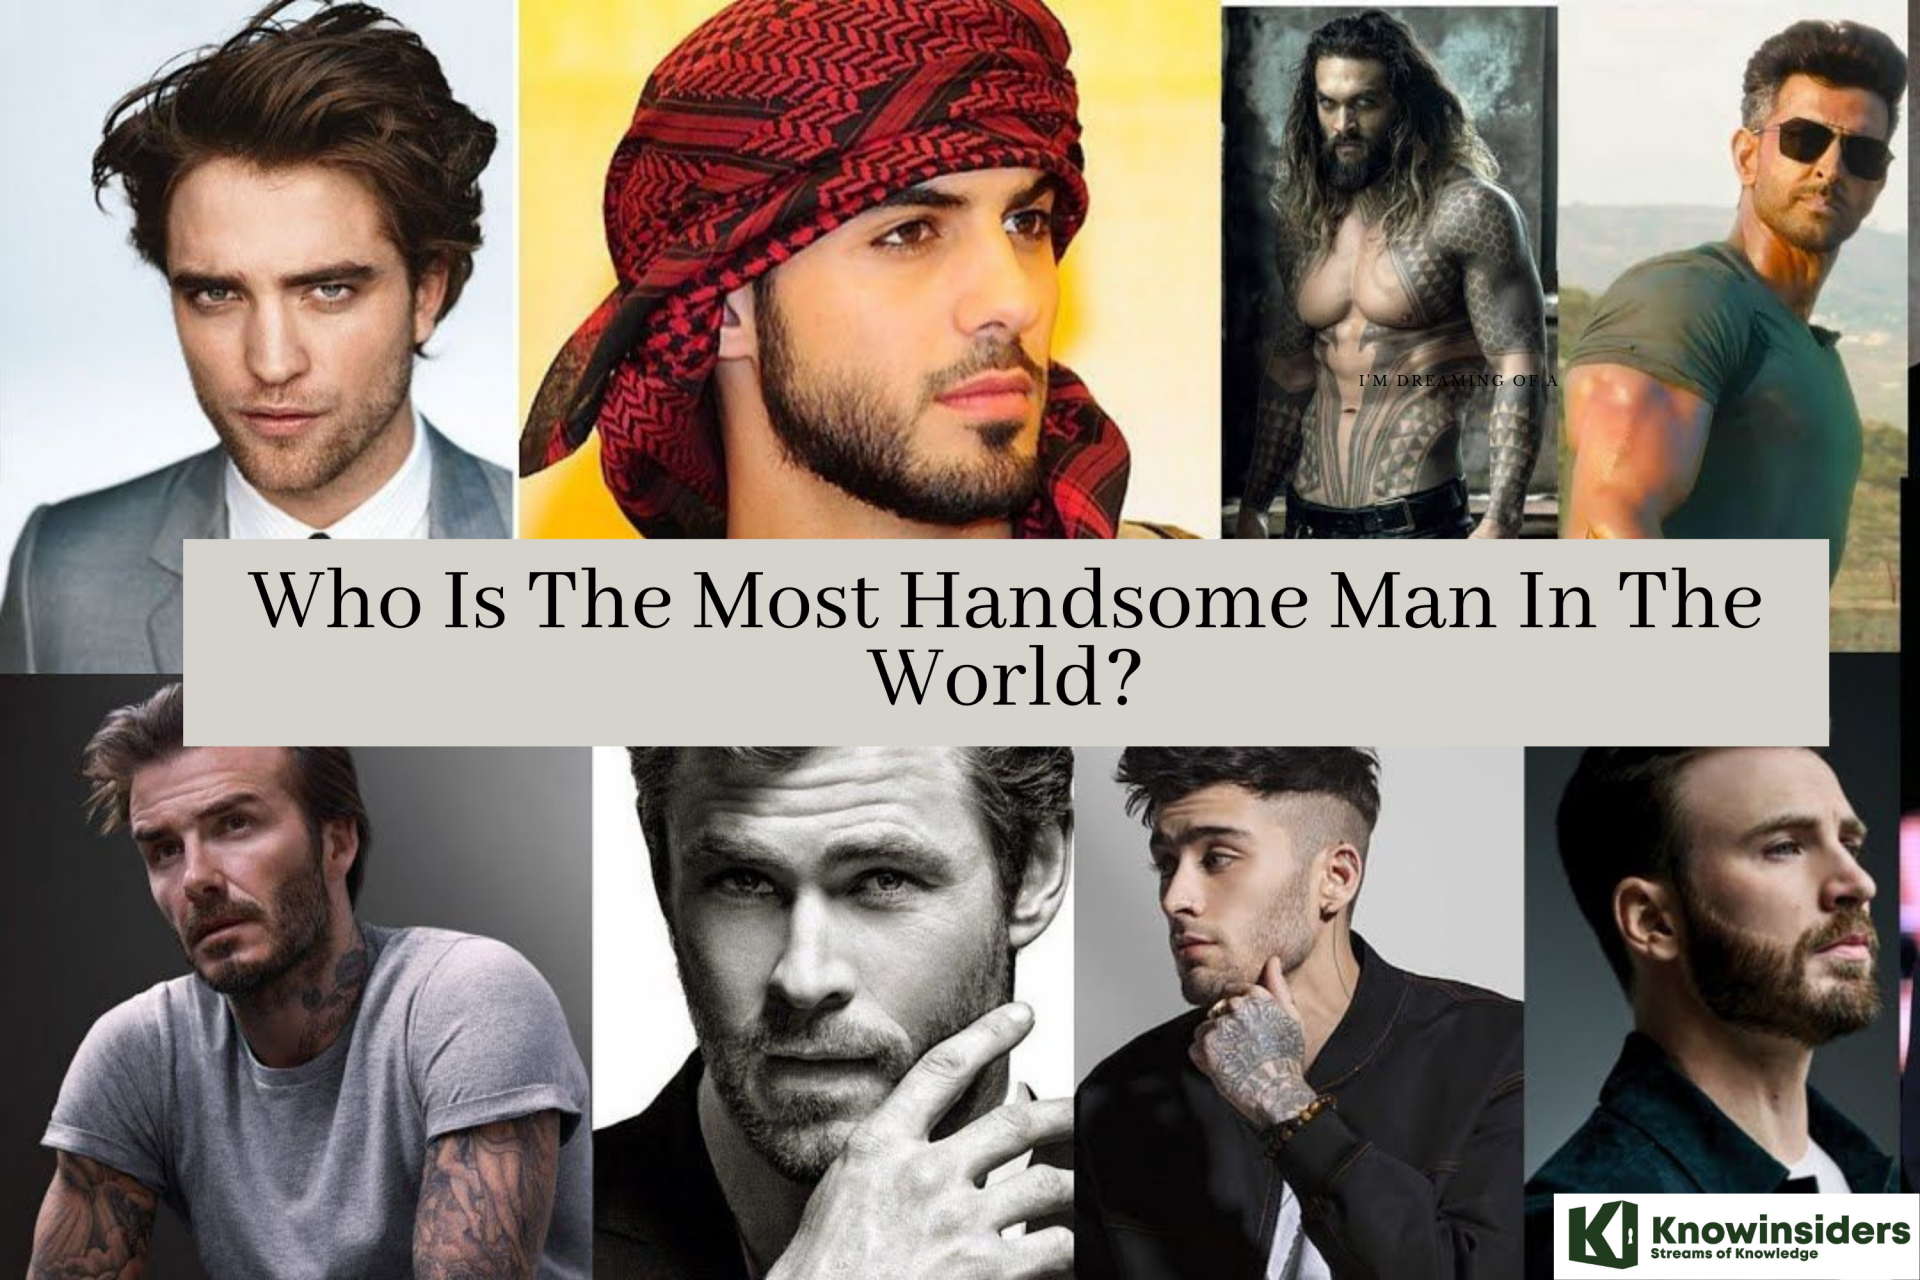 Who Is The Most Handsome Man In The World According To Science?